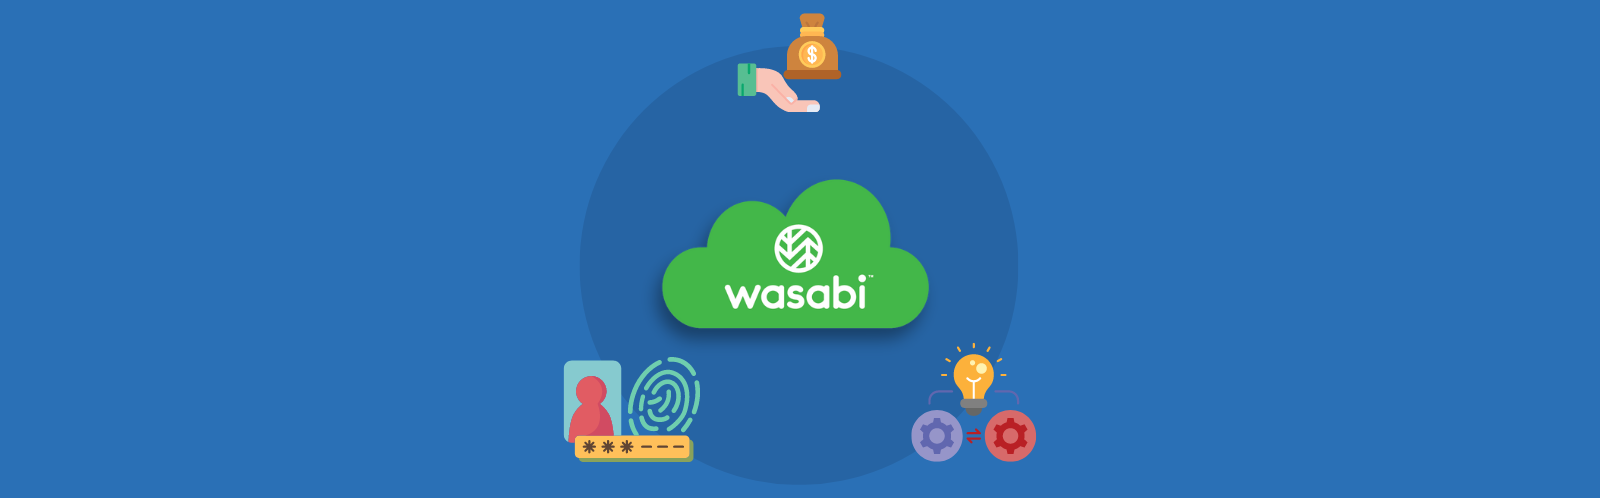 3 Reasons to Consider Wasabi as a Part of Your Data Protection Plan